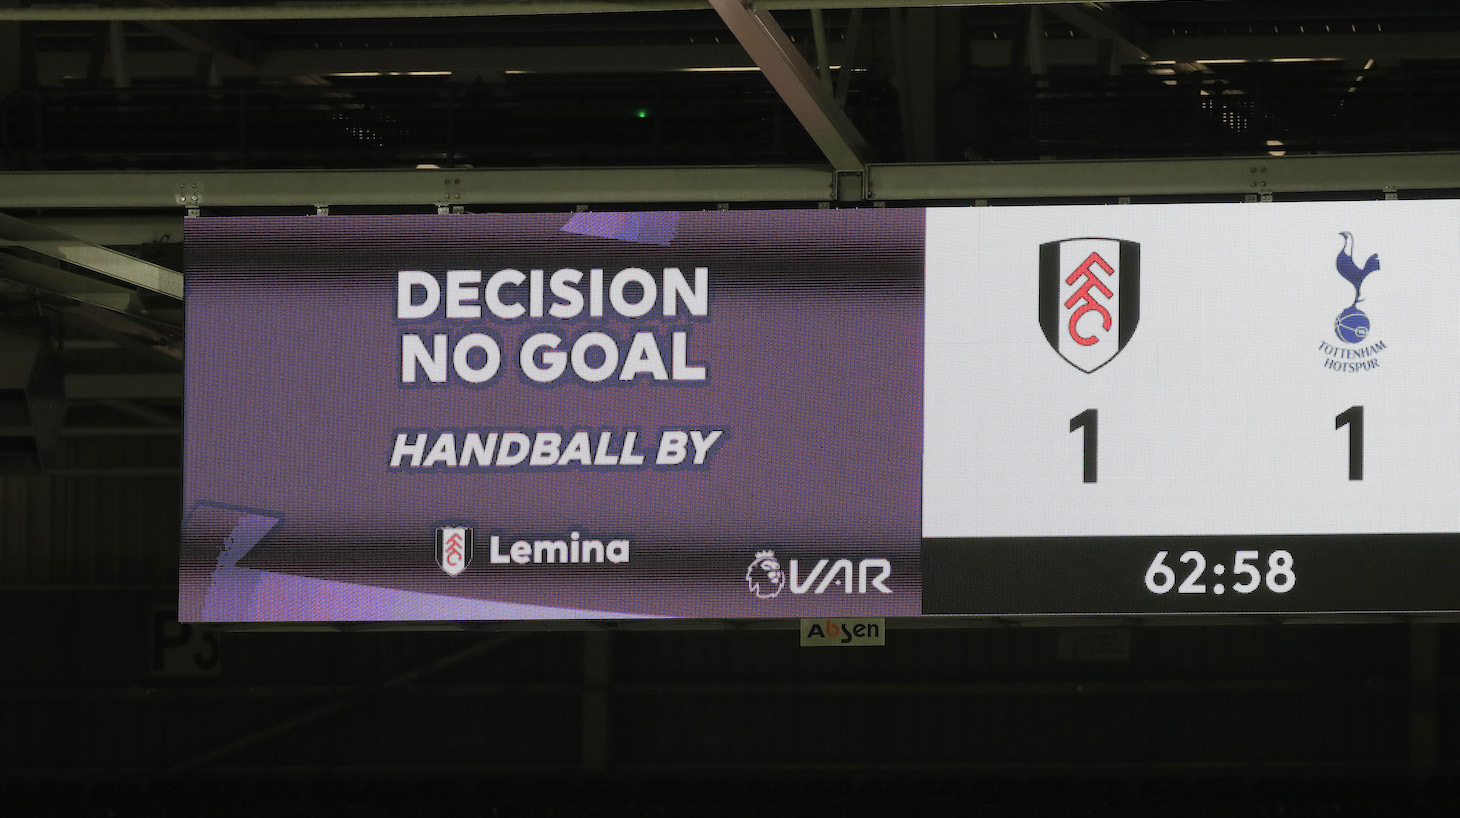 The big screen inside the stadium shows that a VAR review has decided to disallow a goal scored by Josh Maja of Fulham (not pictured) during the Premier League match between Fulham and Tottenham Hotspur at Craven Cottage on March 04, 2021 in London, England.